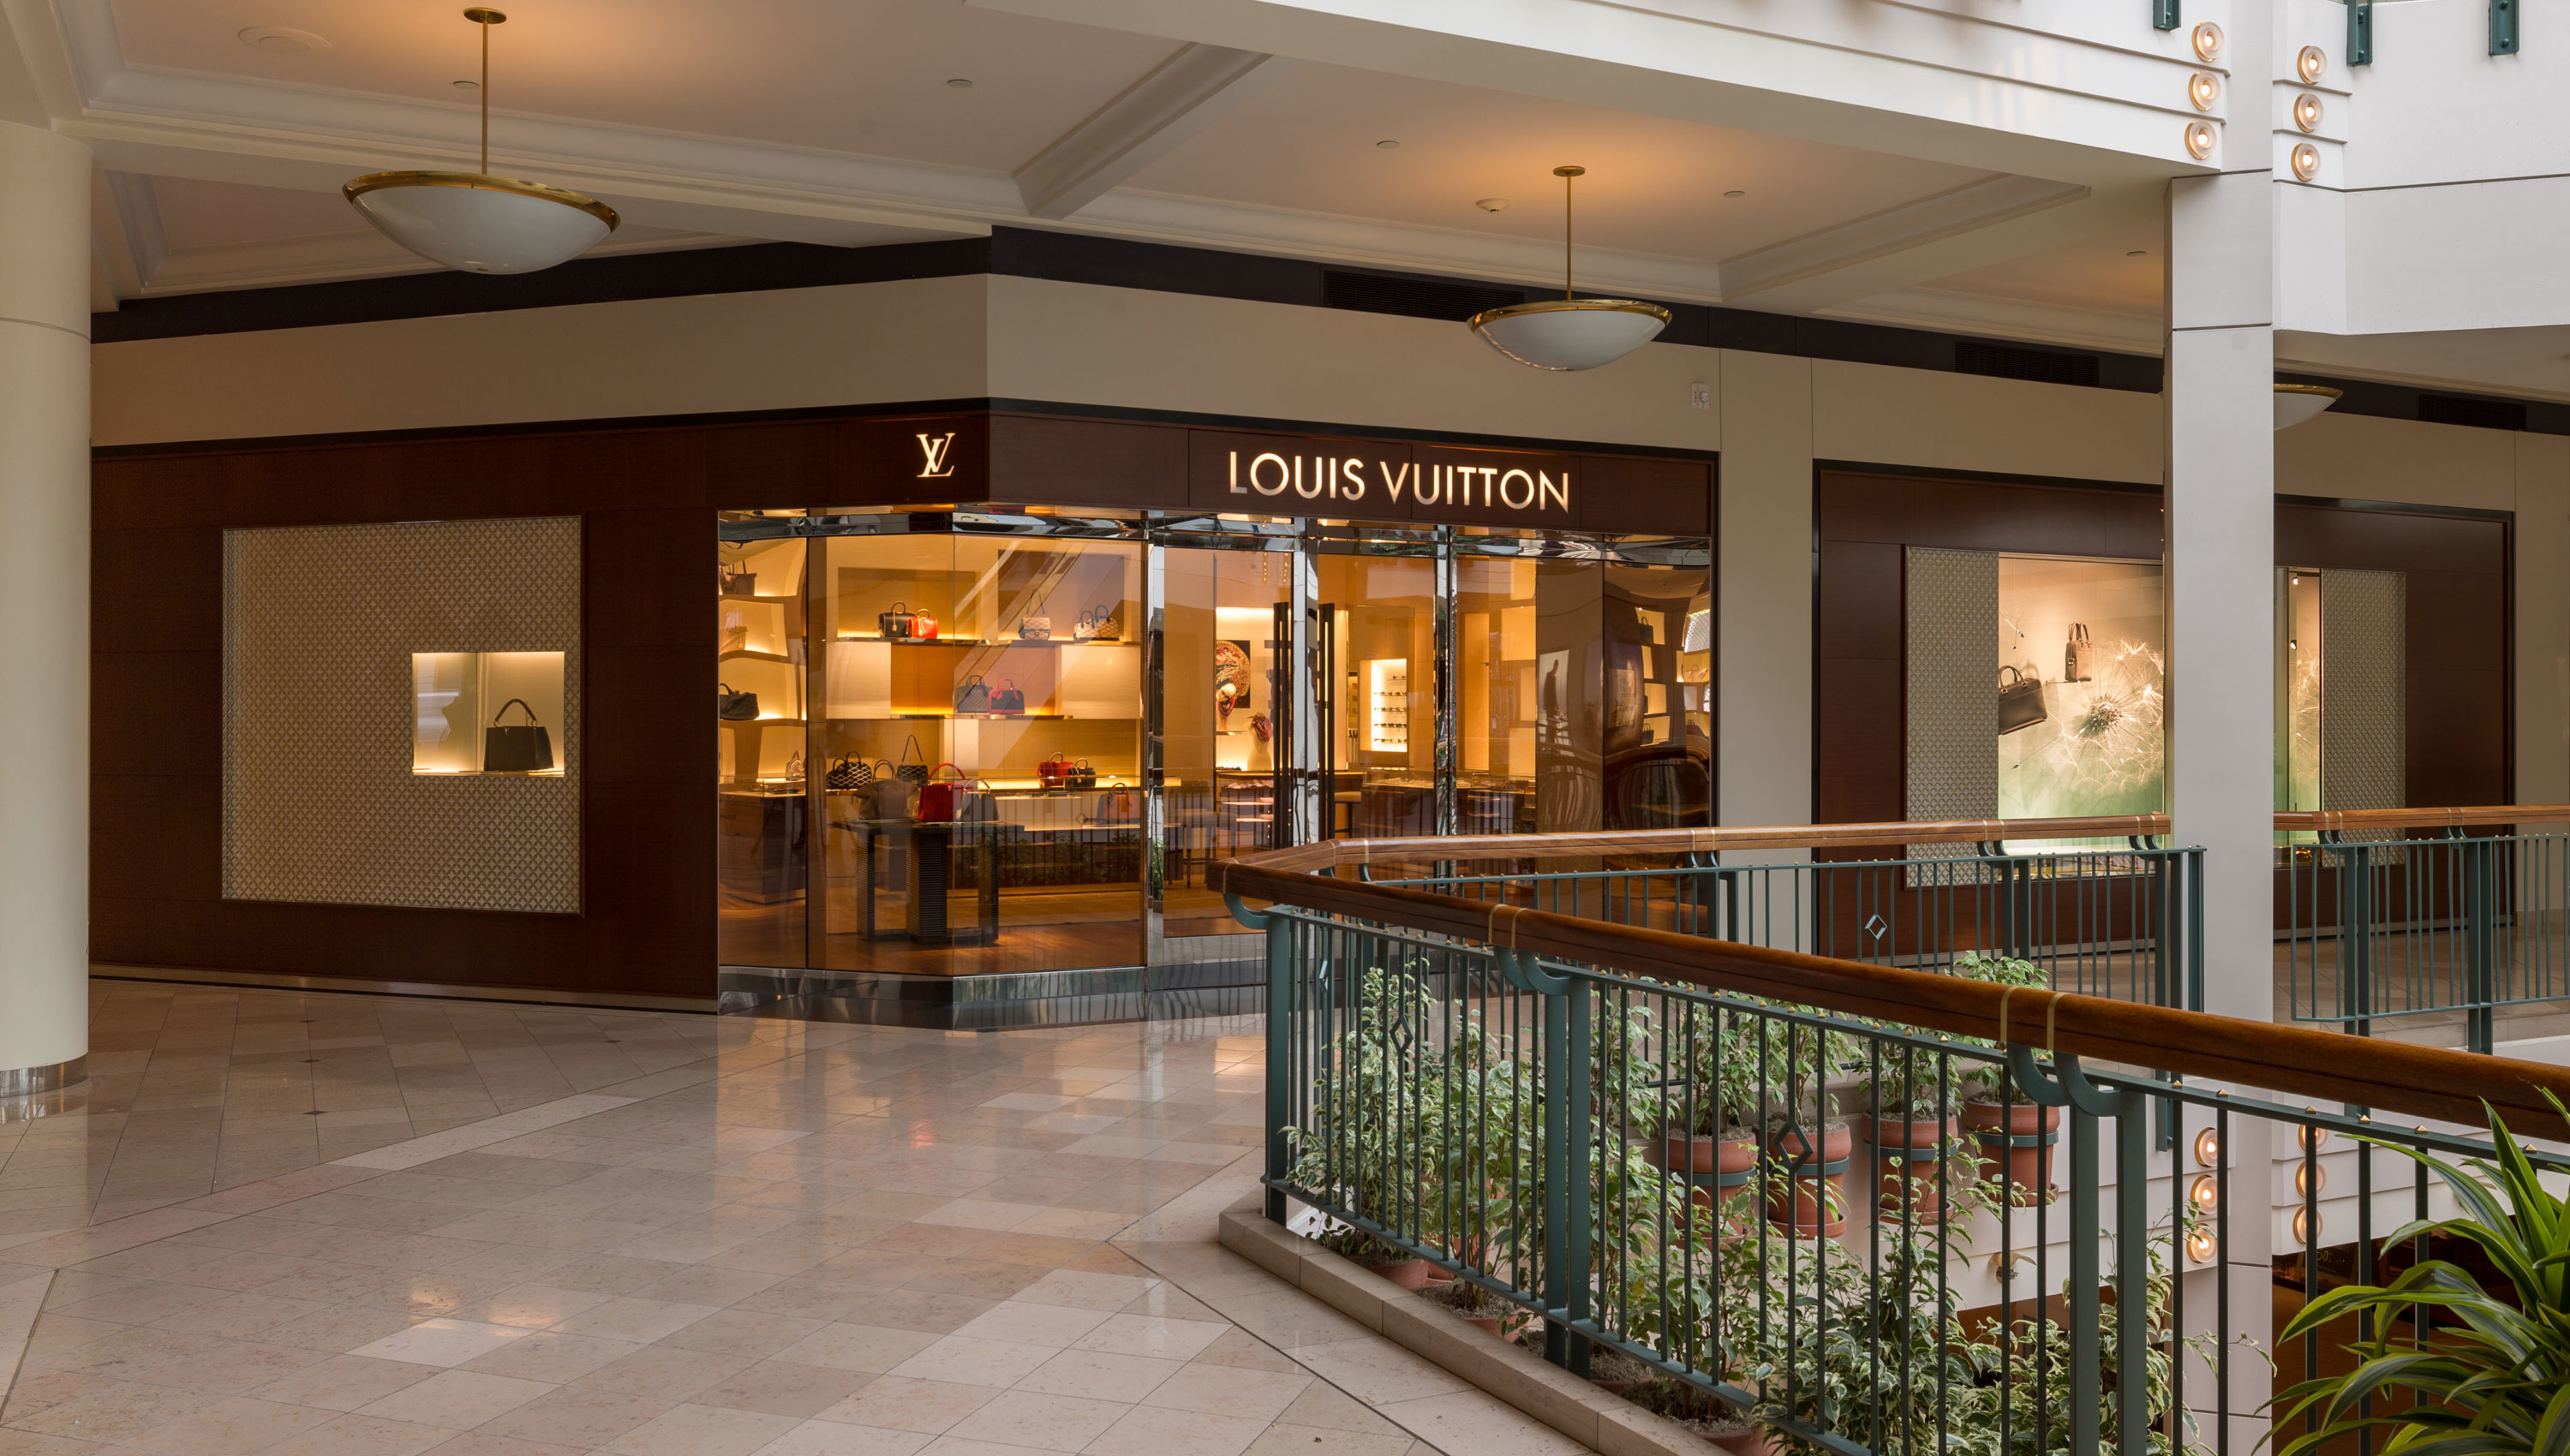 Where Is The Closest Louis Vuitton Store To Me | Jaguar Clubs of North America